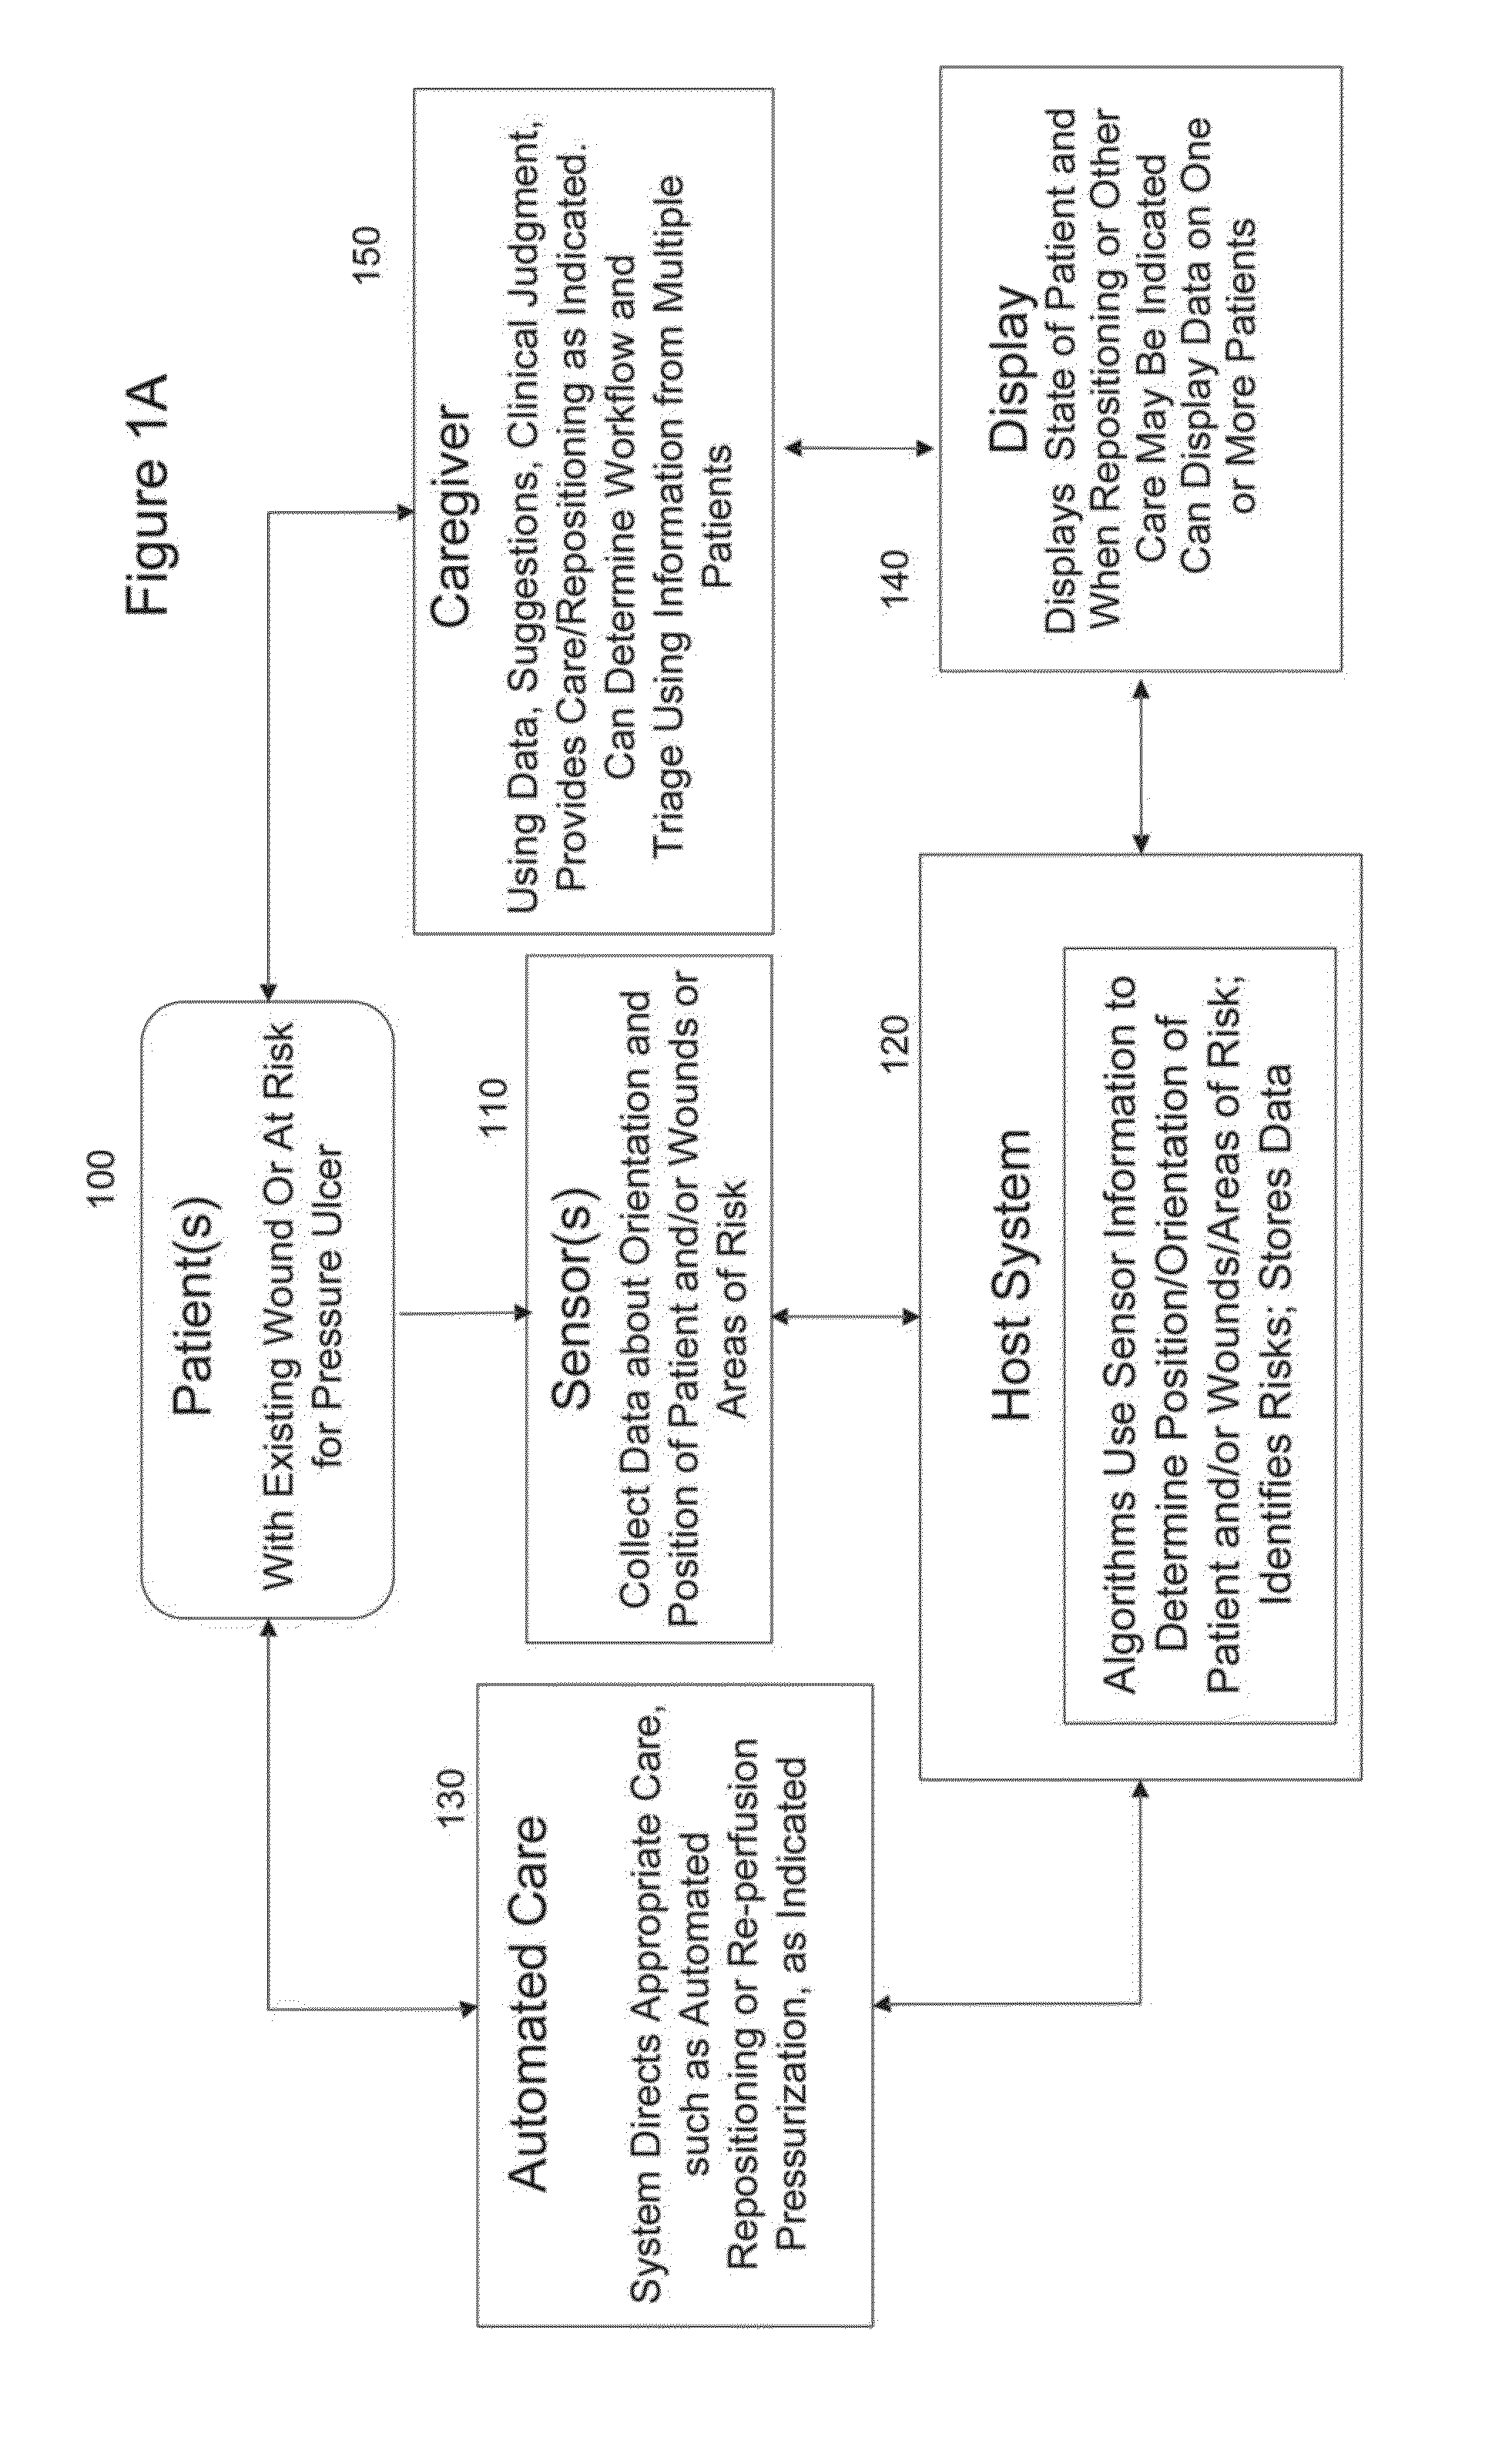 Systems, Devices and Methods for the Prevention and Treatment of Pressure Ulcers, Bed Exits, Falls, and Other Conditions